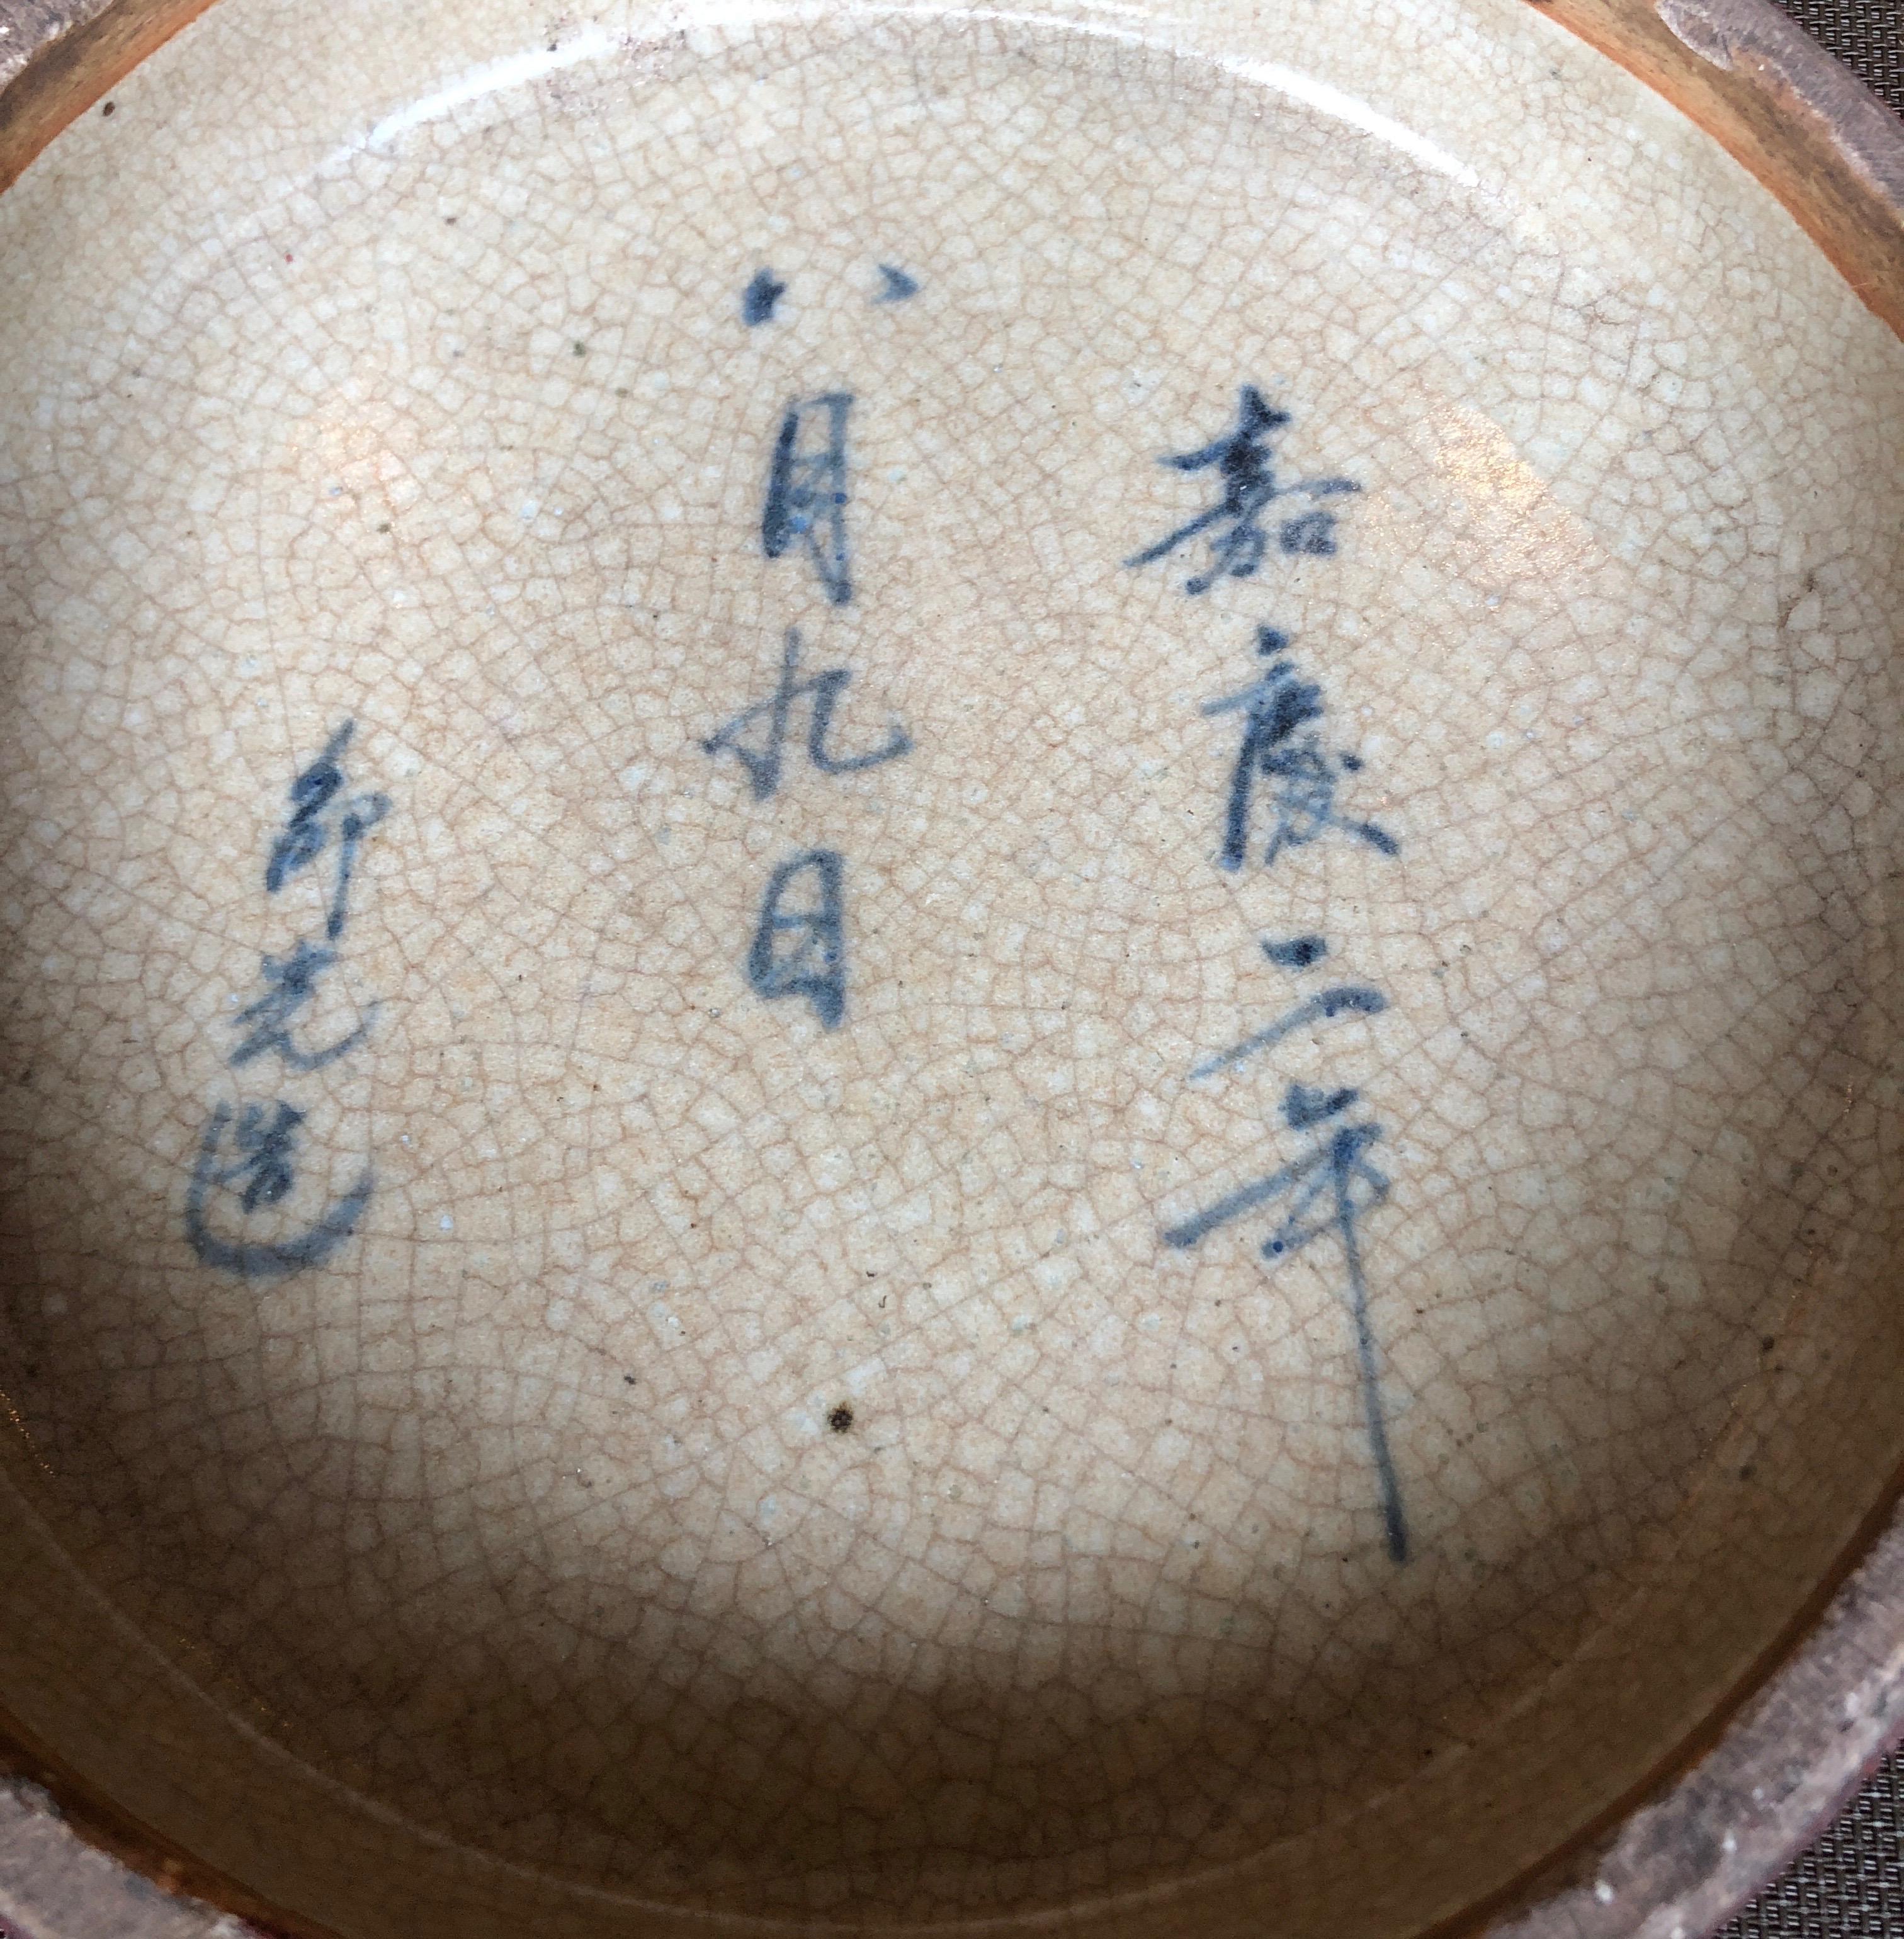 19th Century Antique Ceramic Brush Washer with Chinese Calligraphy and Striking Red Accent